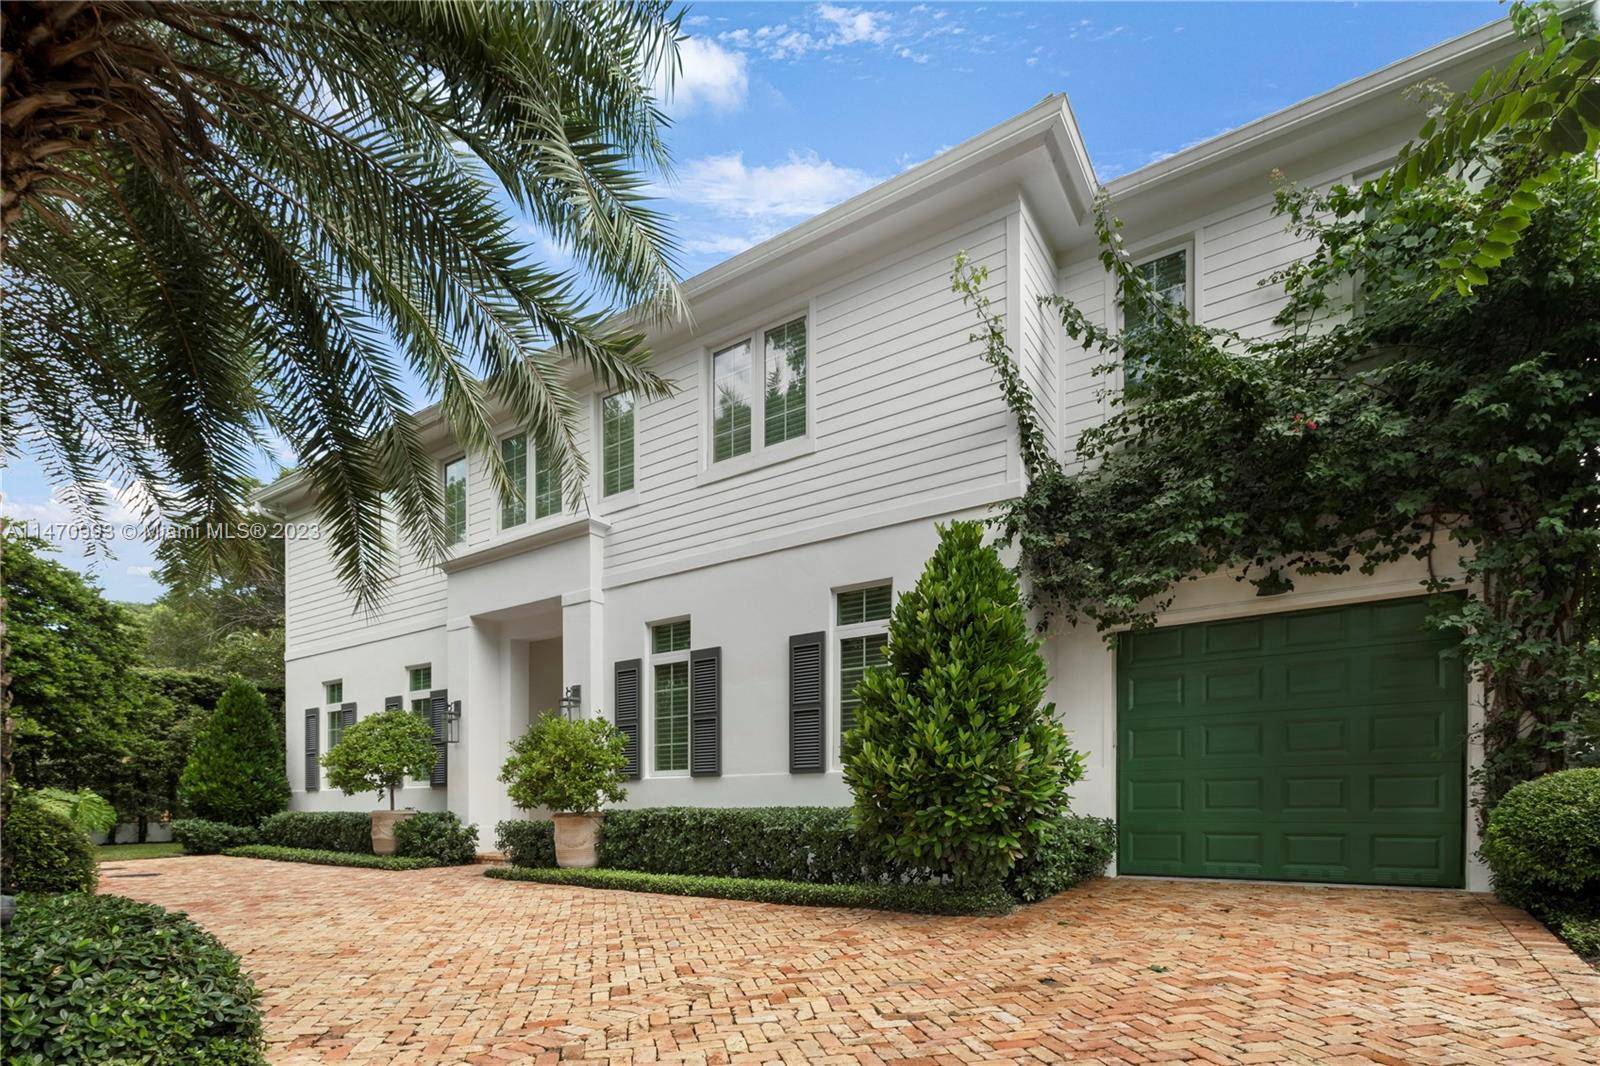 Experience unparalleled luxury in this one of a kind 2018 colonial style home in Coral Gables.